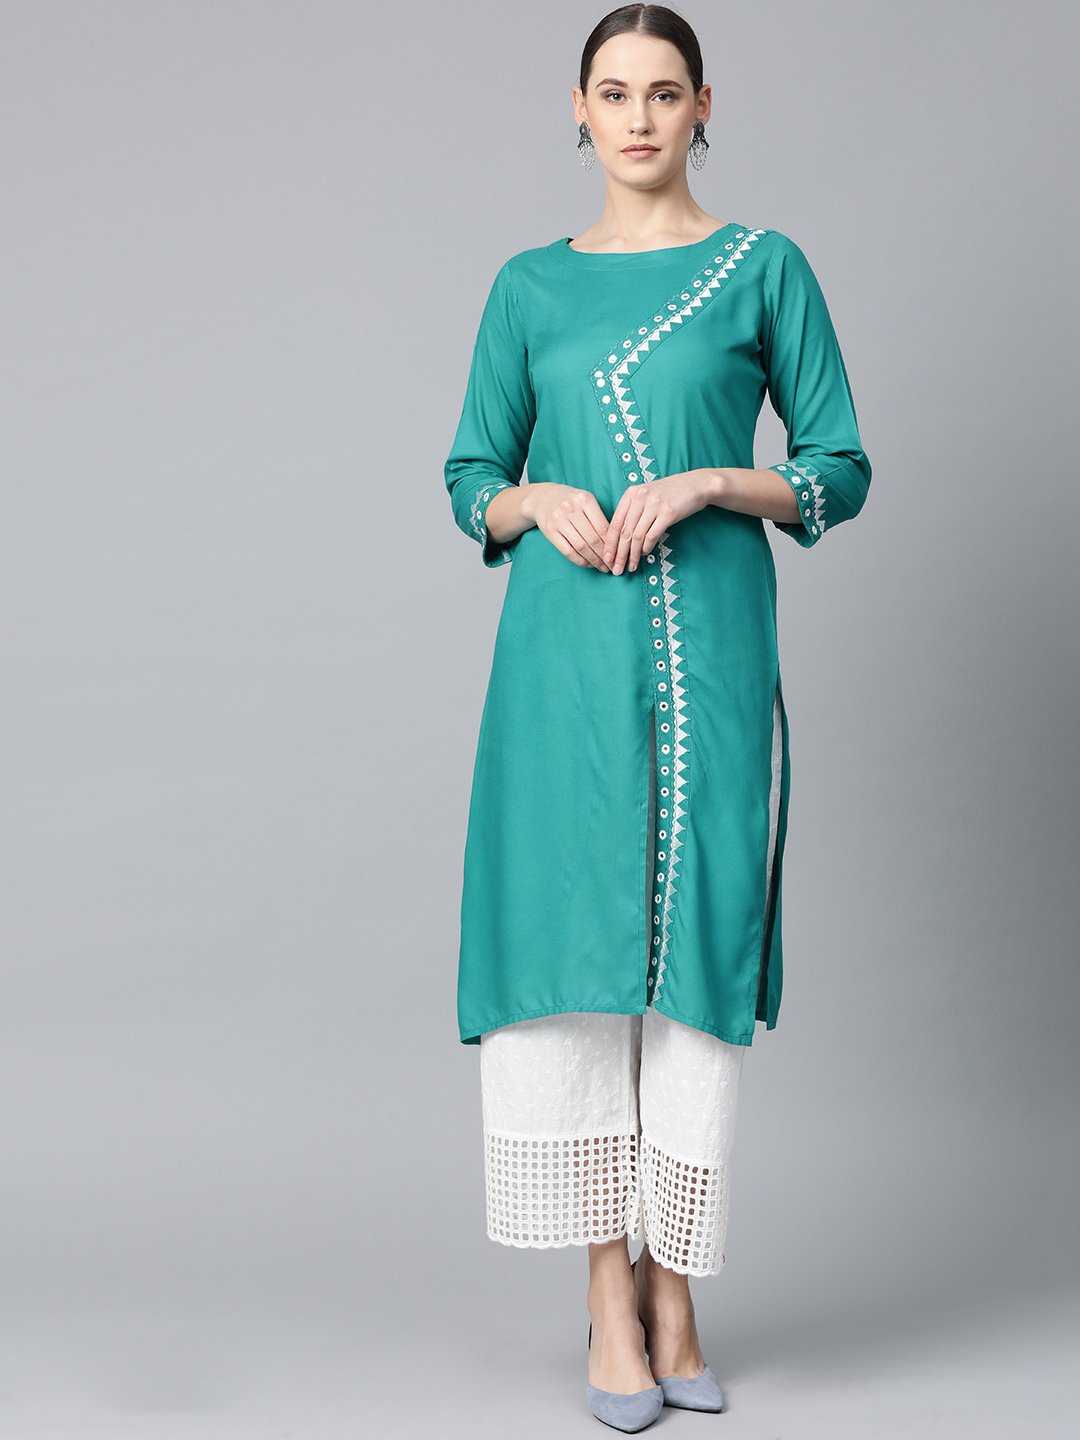 Fbb - India's Fashion Hub - One Time Price on fbbonline. Kurtis upto 699,  now only at FLAT Rs. 419. Hurry! Shop Now - http://bit.ly/2XLQqV9 | Facebook